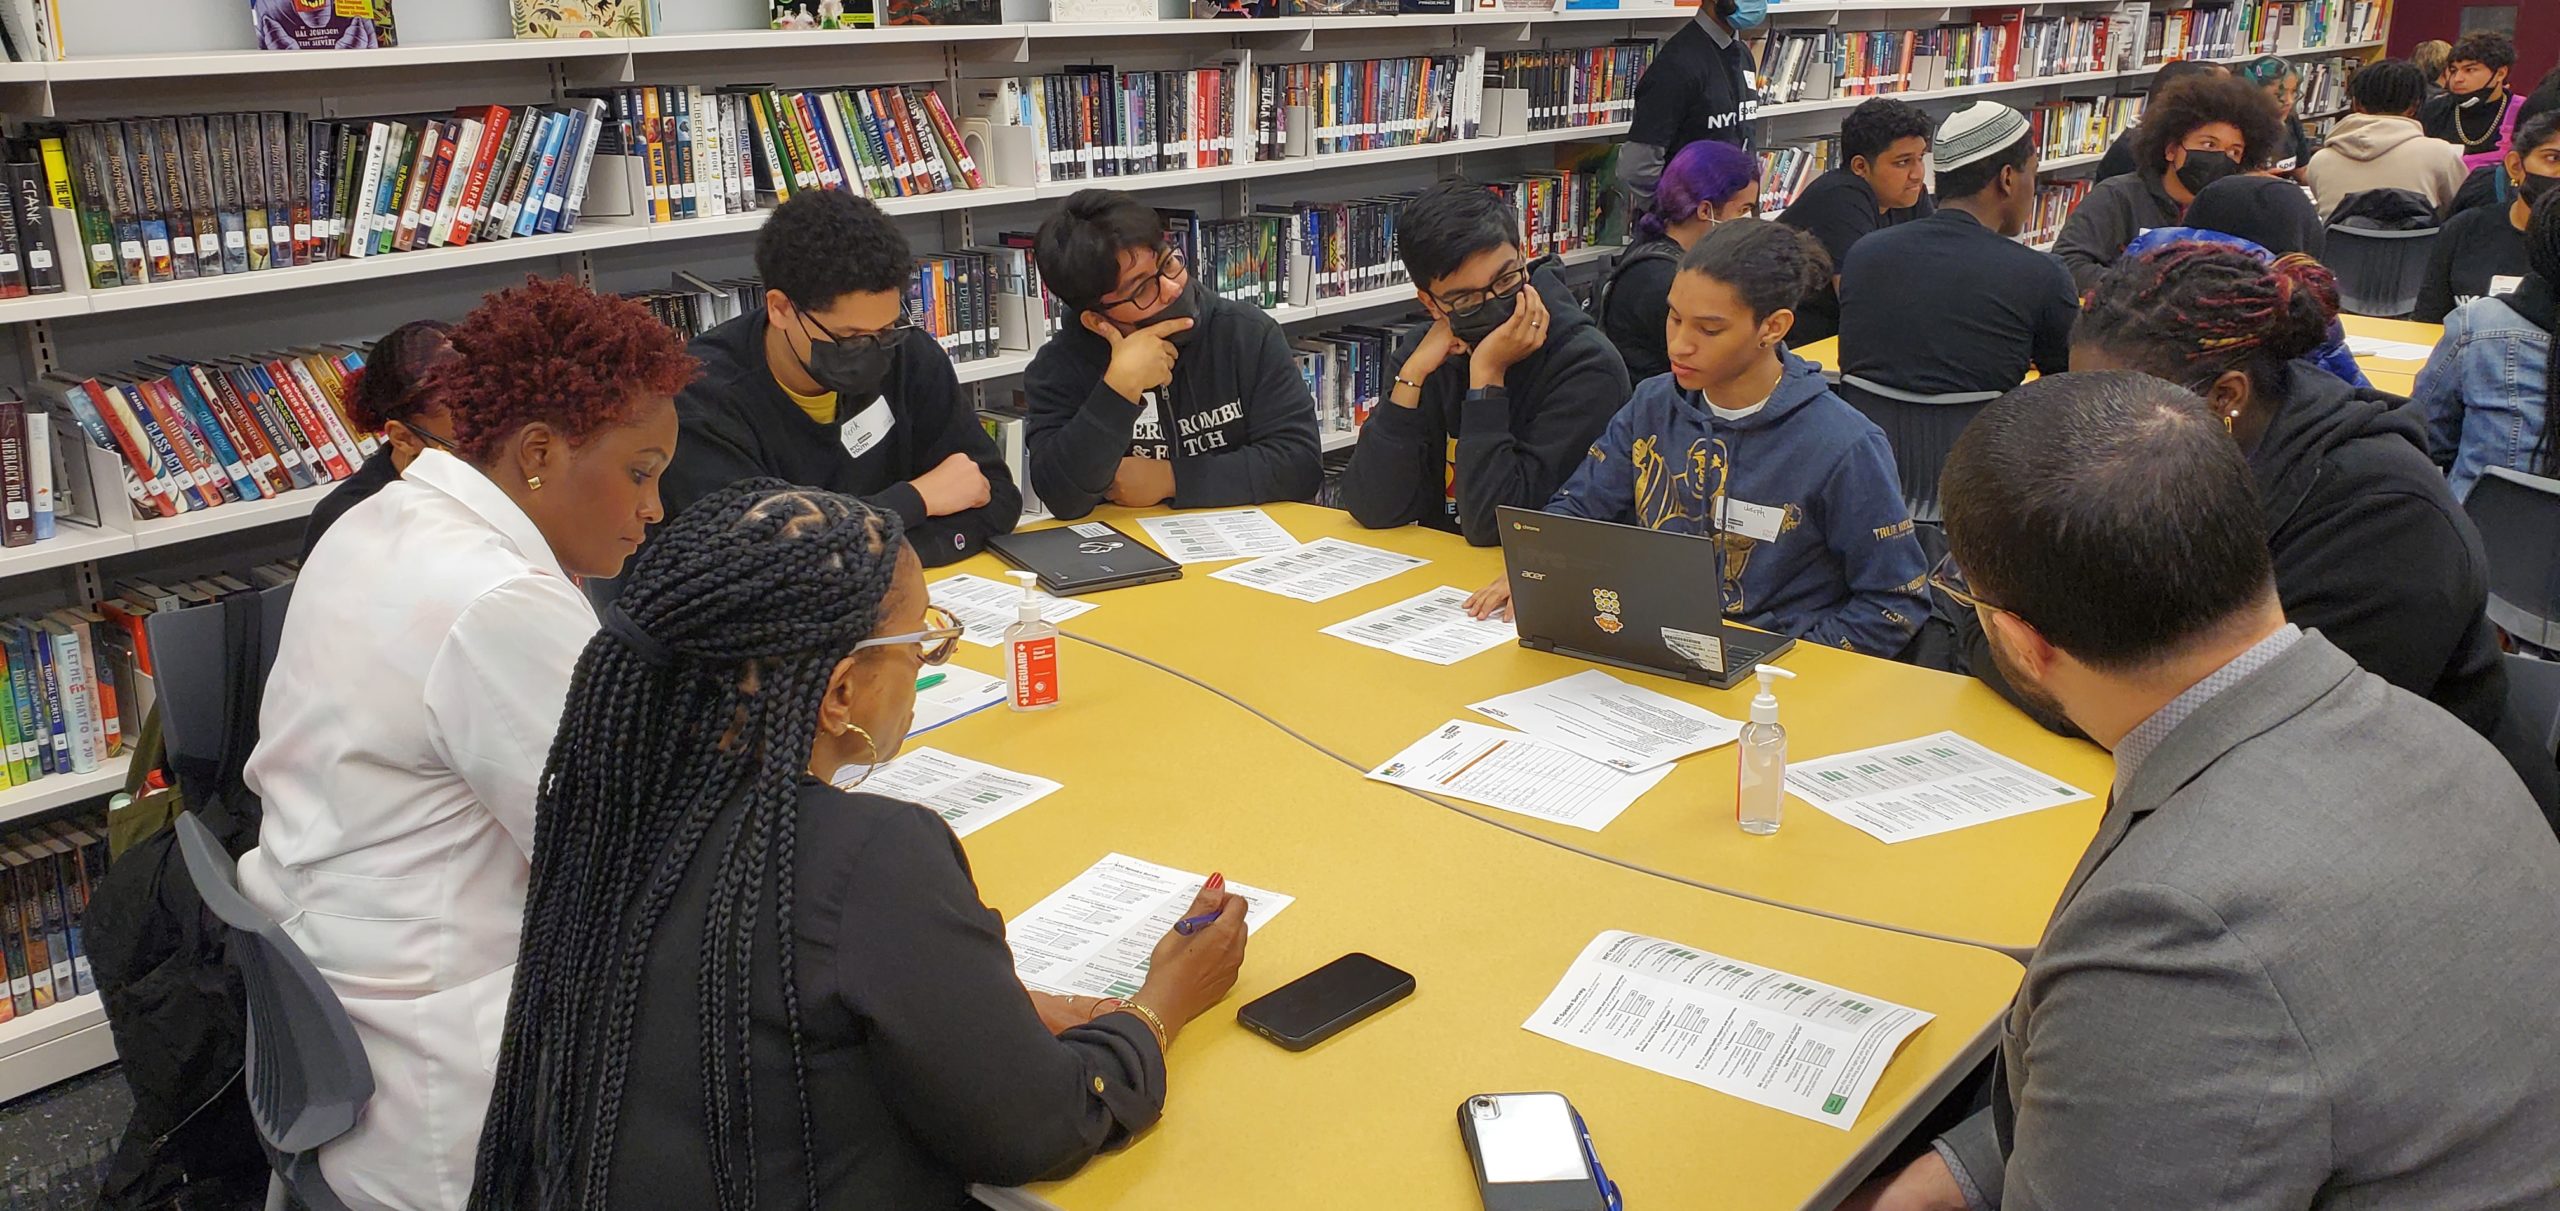 A group of Black and brown teenagers sits around two yellow tables pushed together, with one adult joining them. They all have NYC Speaks data handouts in front of them. One student has a computer open, facilitating the conversation. Behind them is a wall of bookshelves filled with books.